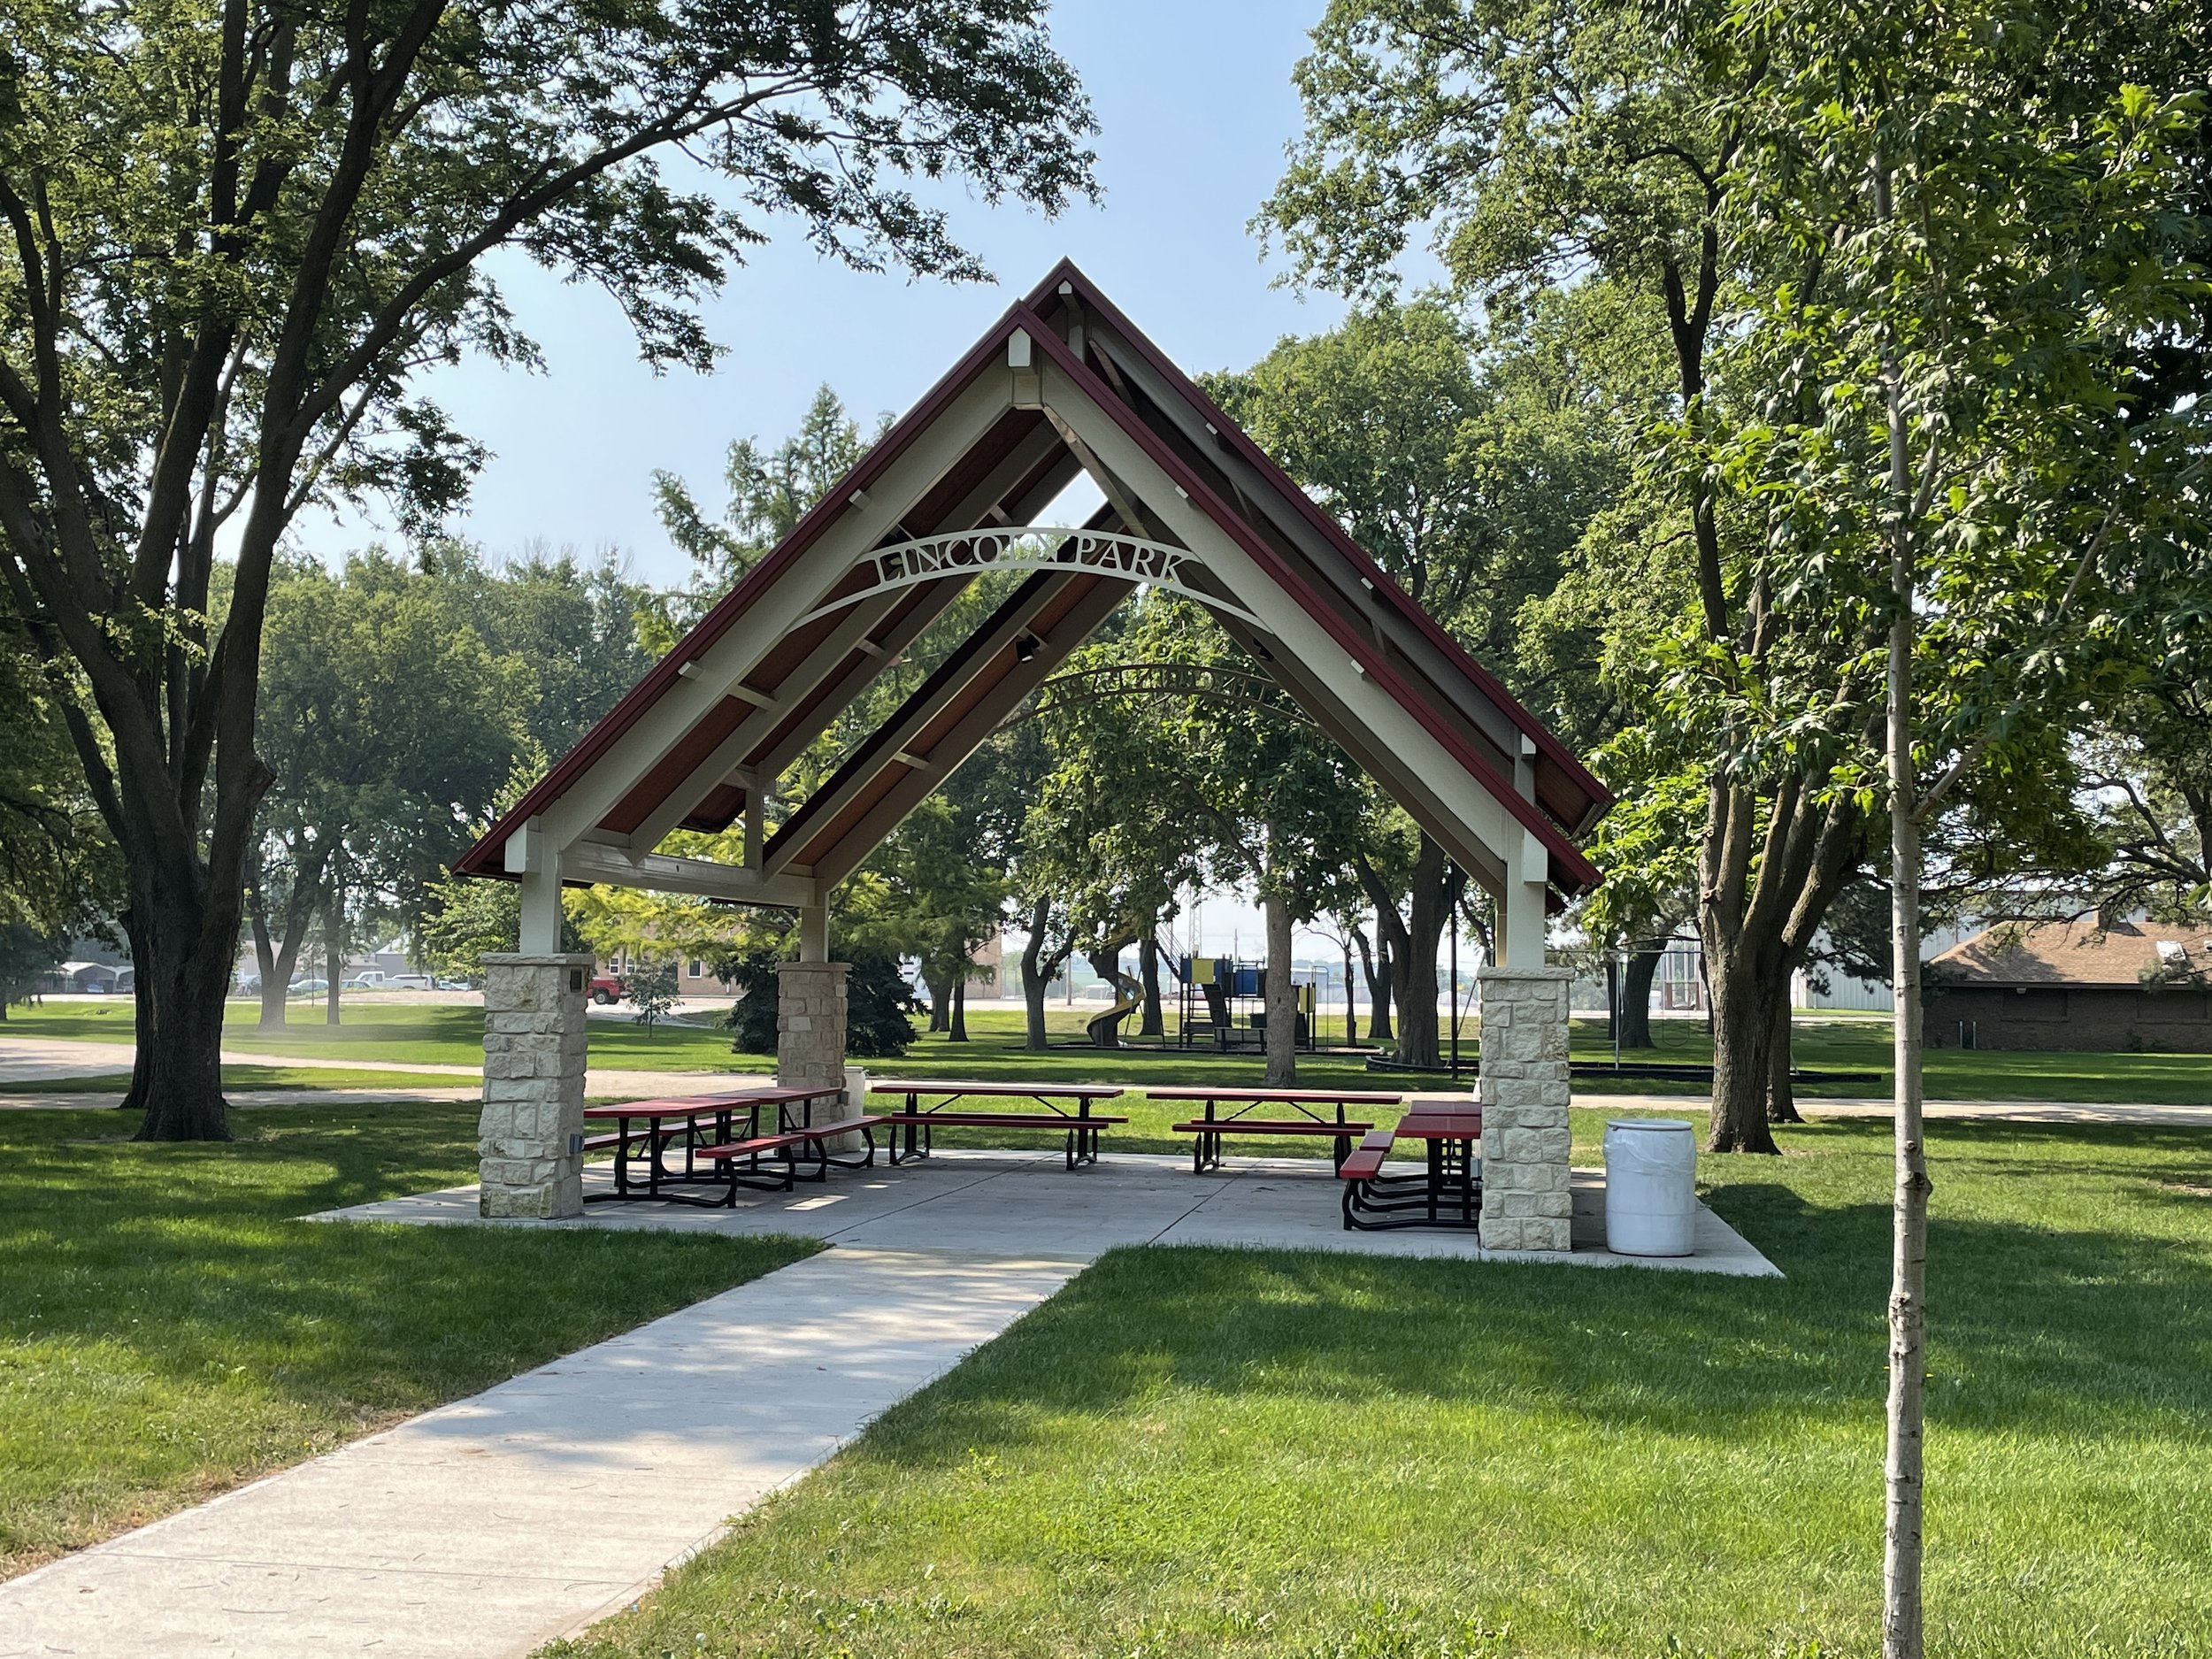   LINCOLN PARK PAVILION - The lighted shelter provides a shady spot for birthday parties, family reunions, picnics and a pleasant lunch break from work.  